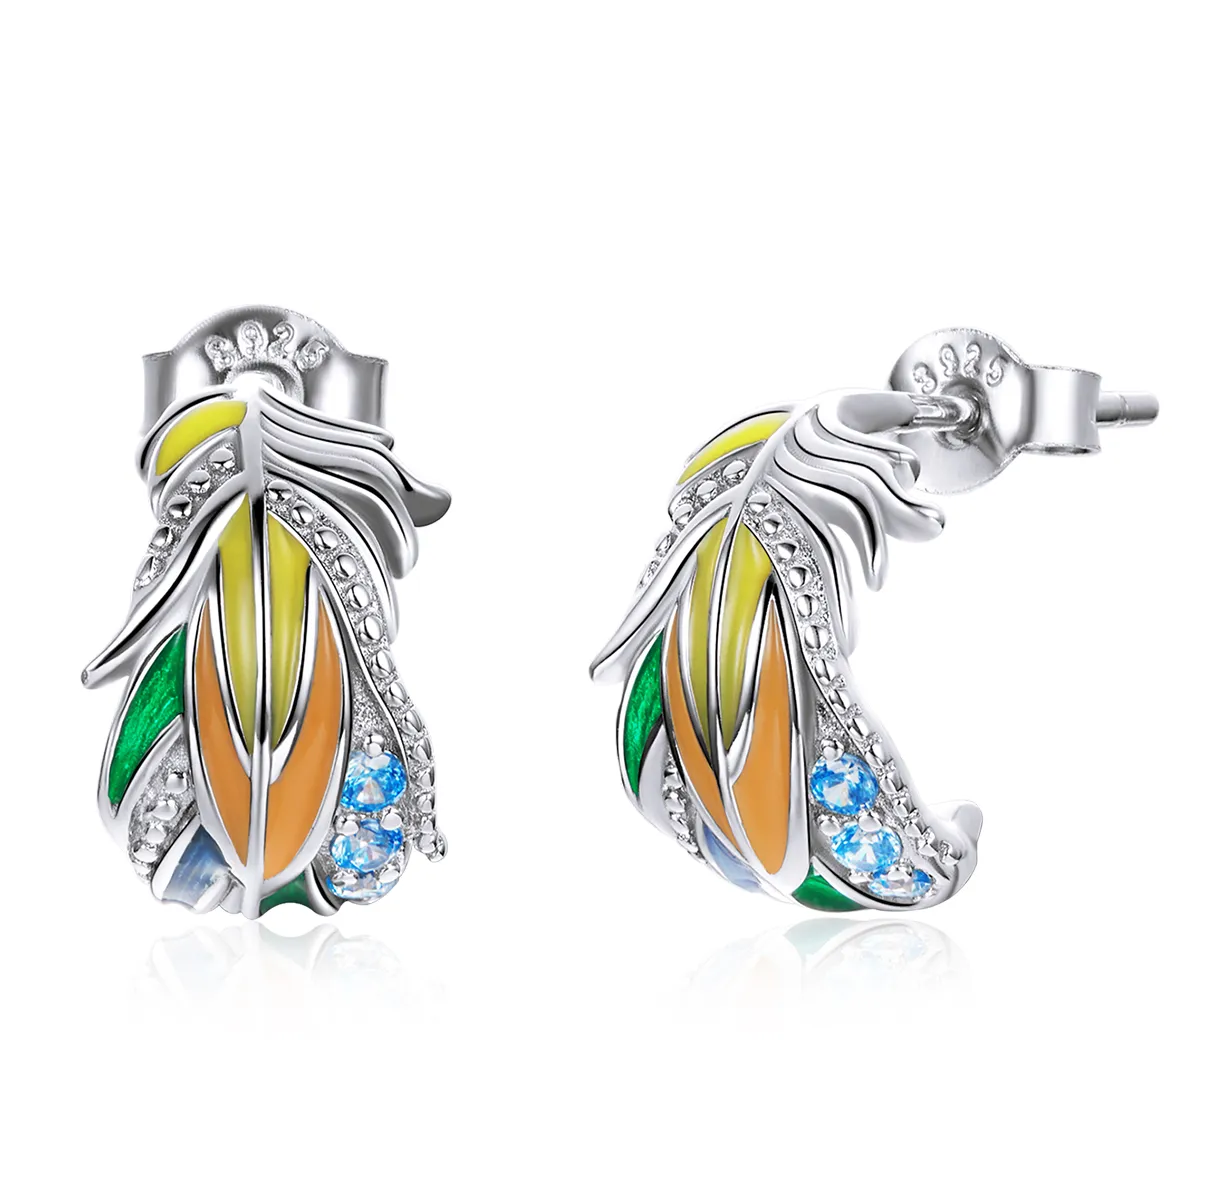 Pandora Style Silver colored feathers Stud Earrings - SCE1128